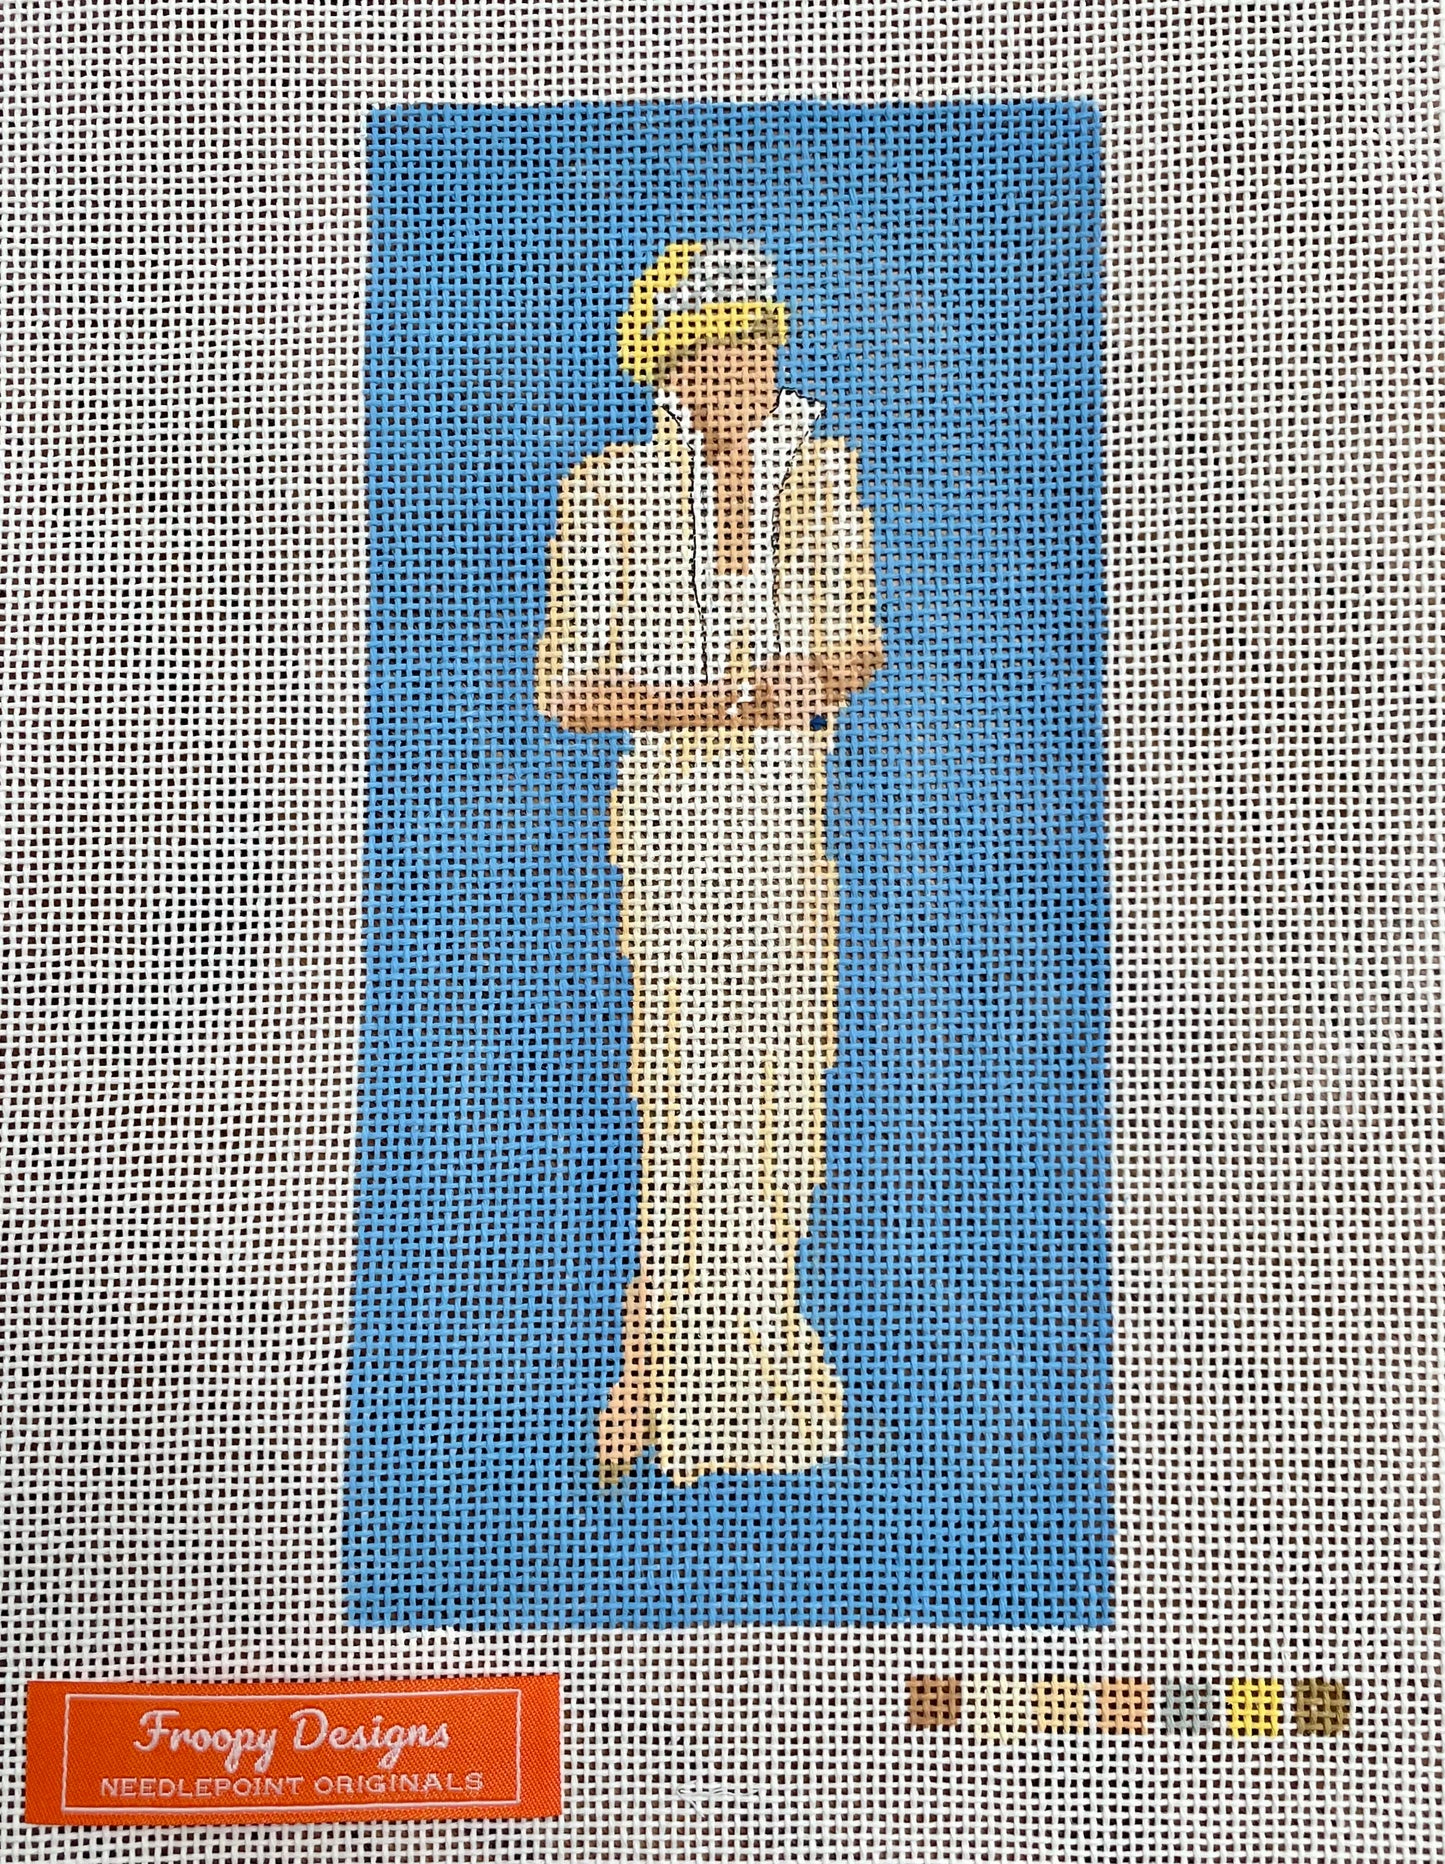 “DIANA IN THE PEARL DRESS”,  2.5” x 7” on 18 mesh